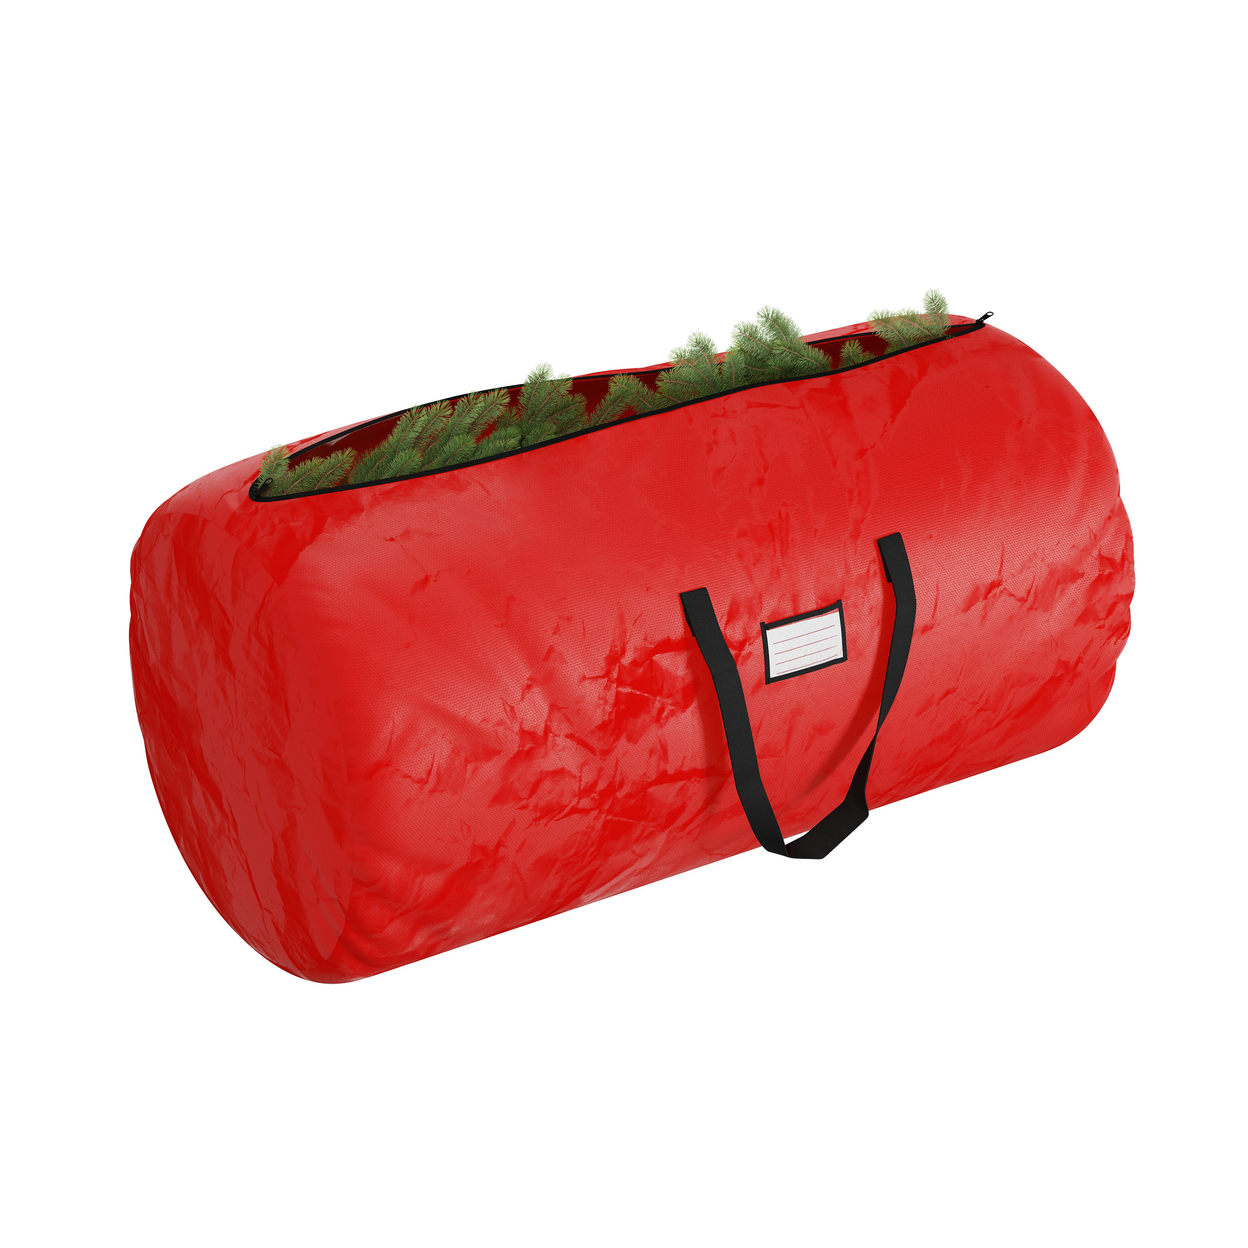 Elf Stor Deluxe Red Holiday Christmas Tree Storage Bag XLarge For 12 Foot Tree